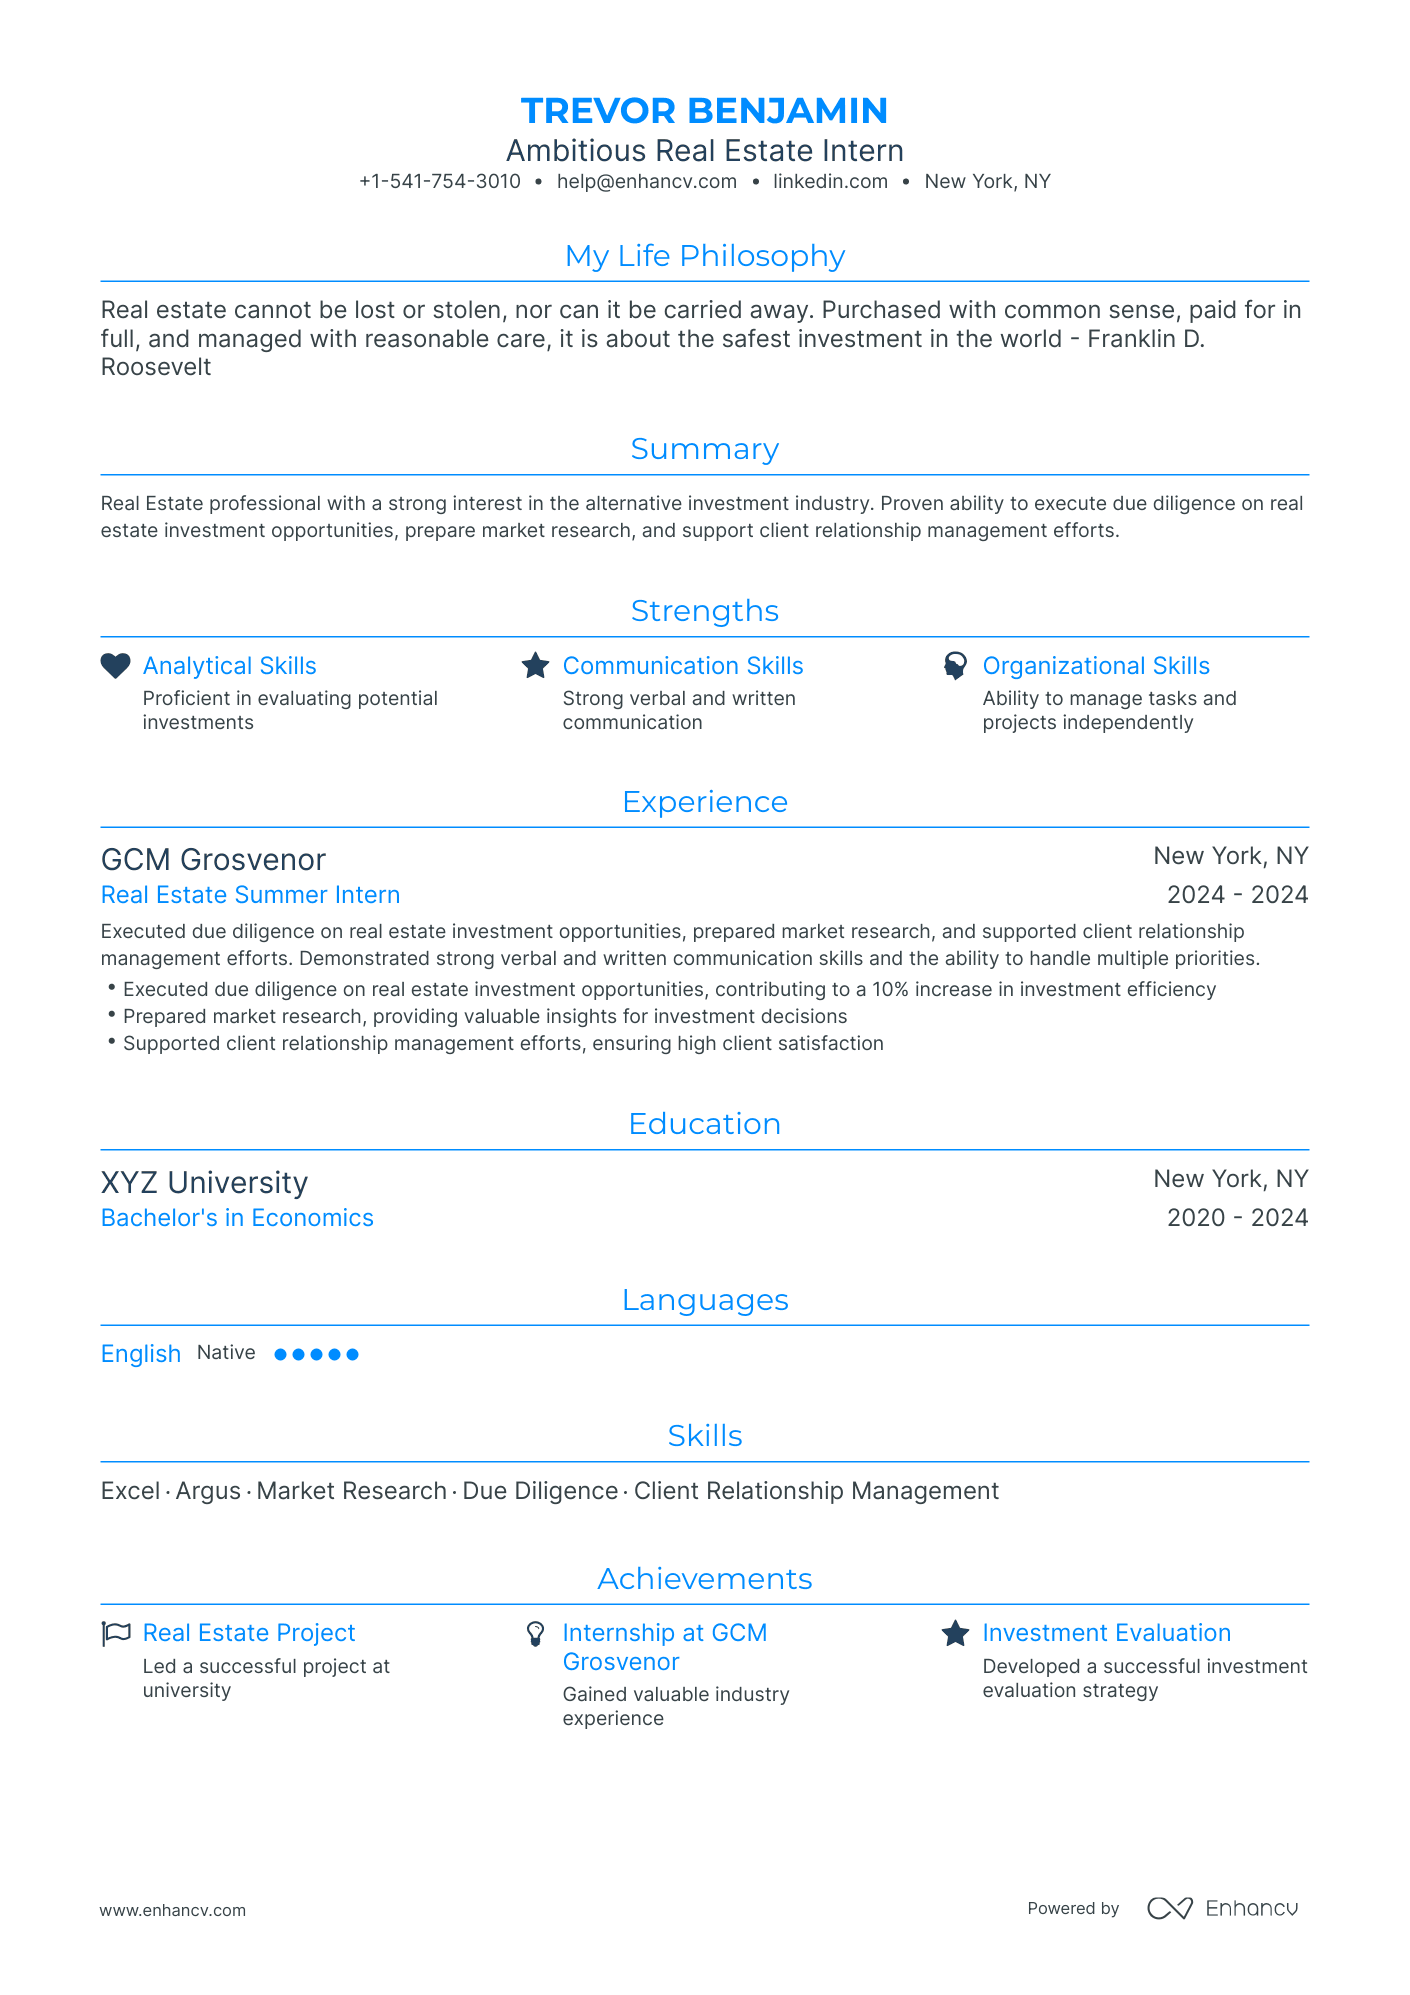 Traditional Real Estate Intern Resume Template